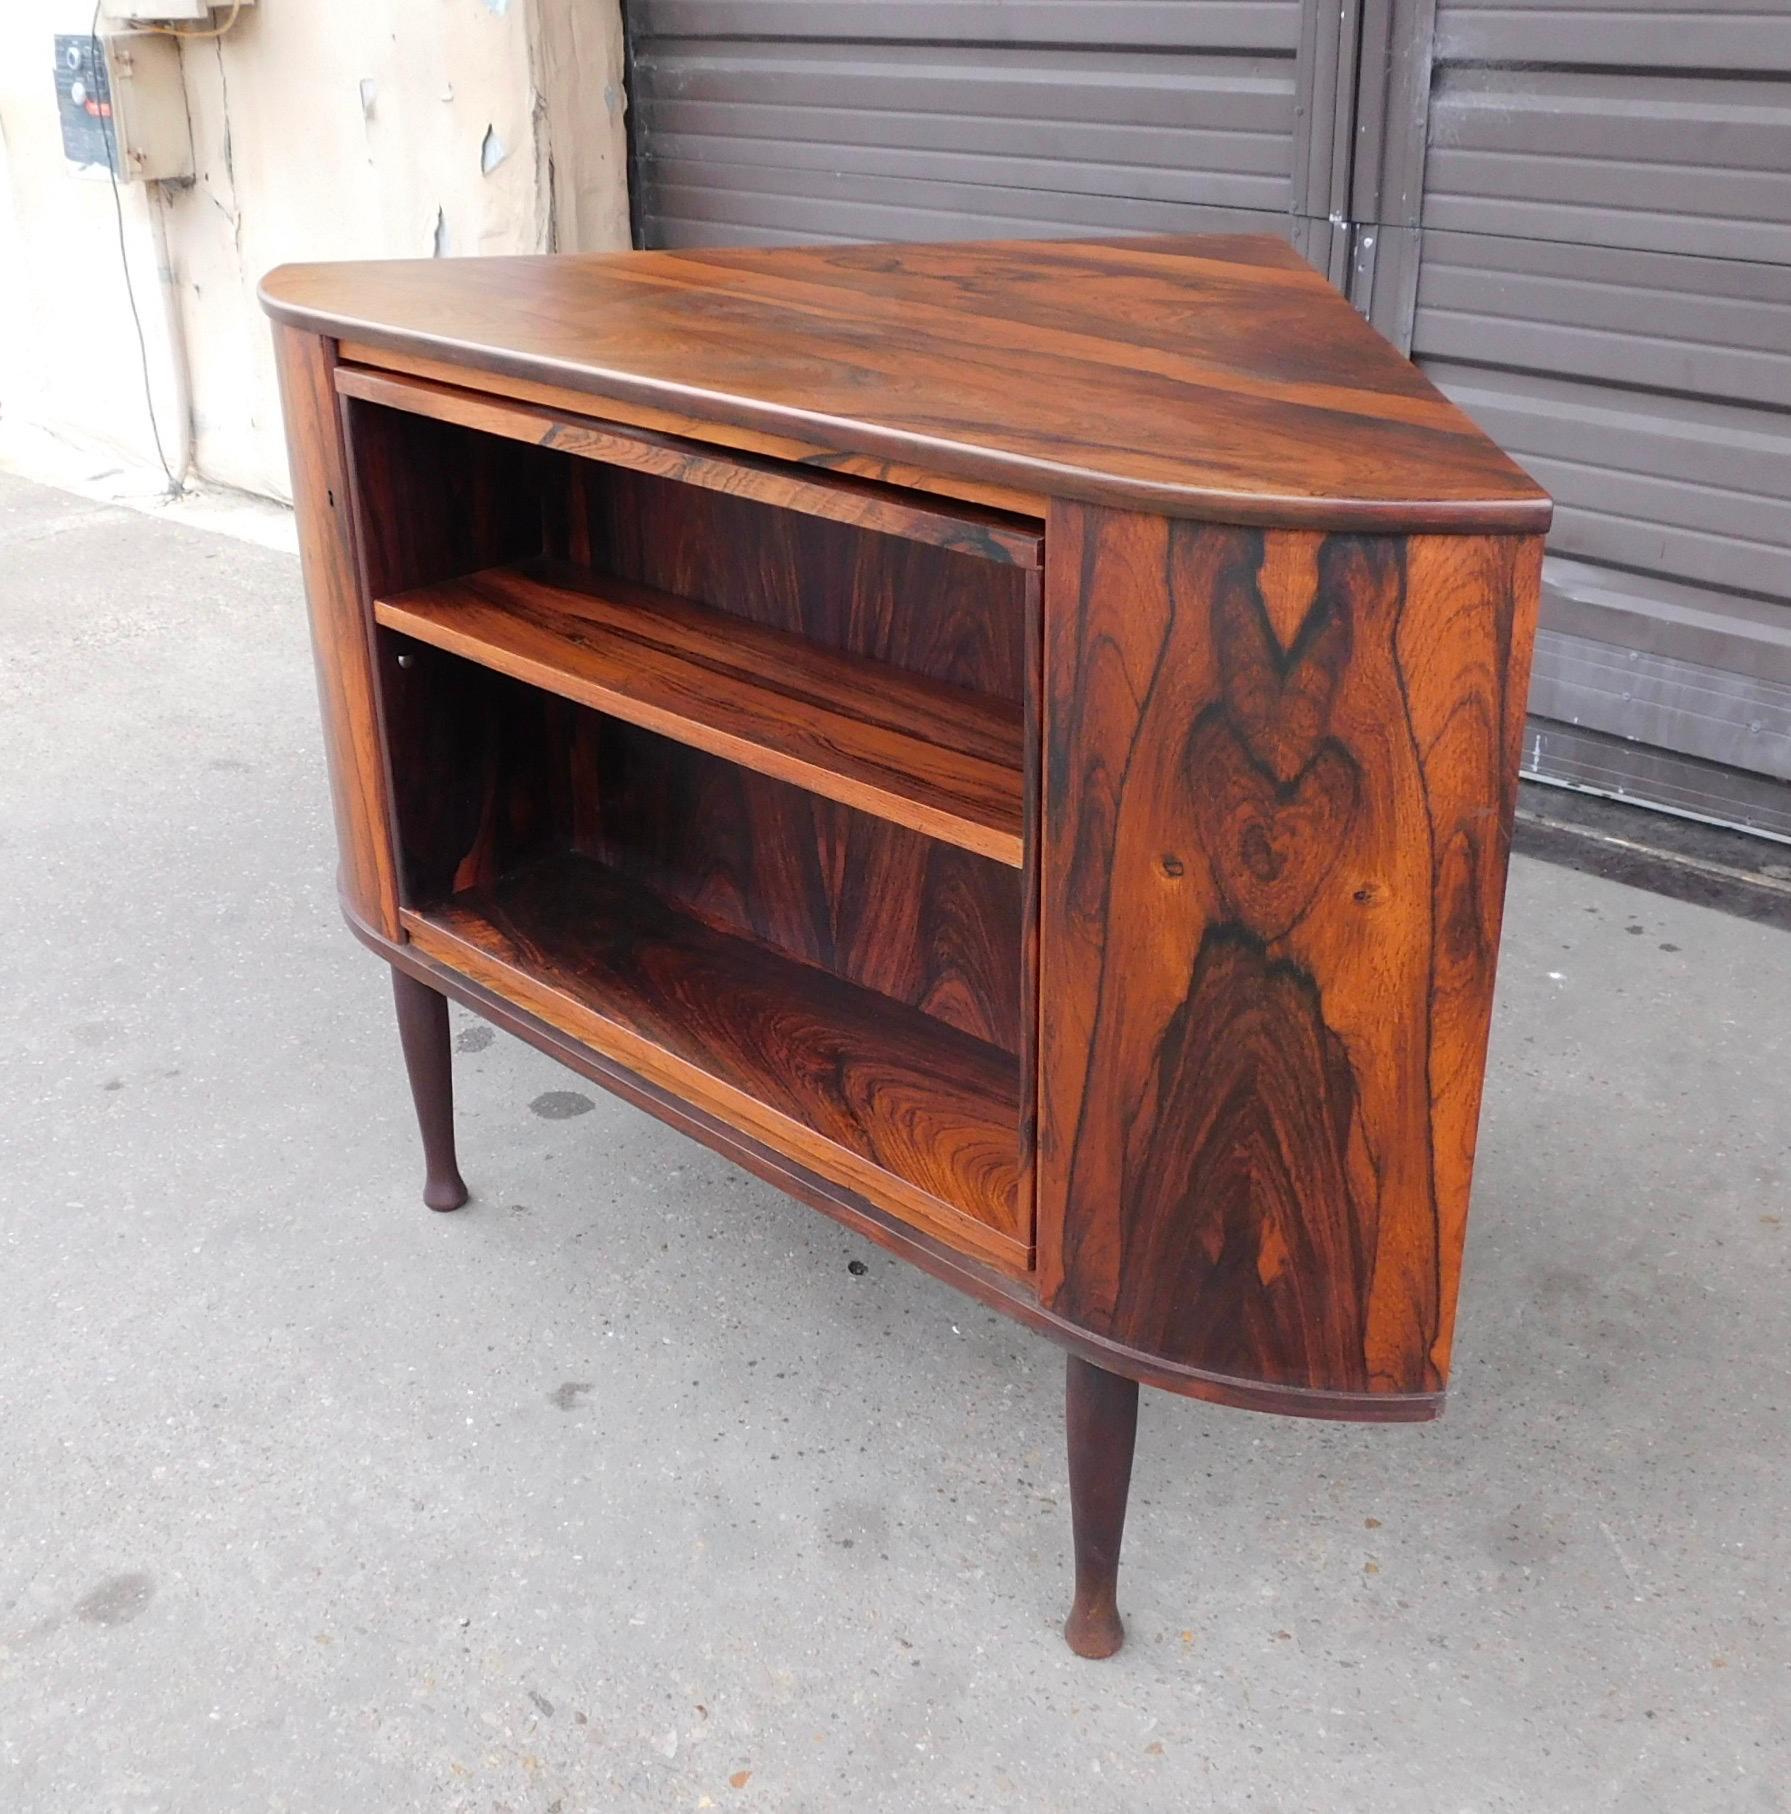 Mid-20th Century Danish Mid-Century Modern Rosewood Corner Dry Bar and Bookcase, circa 1960 For Sale